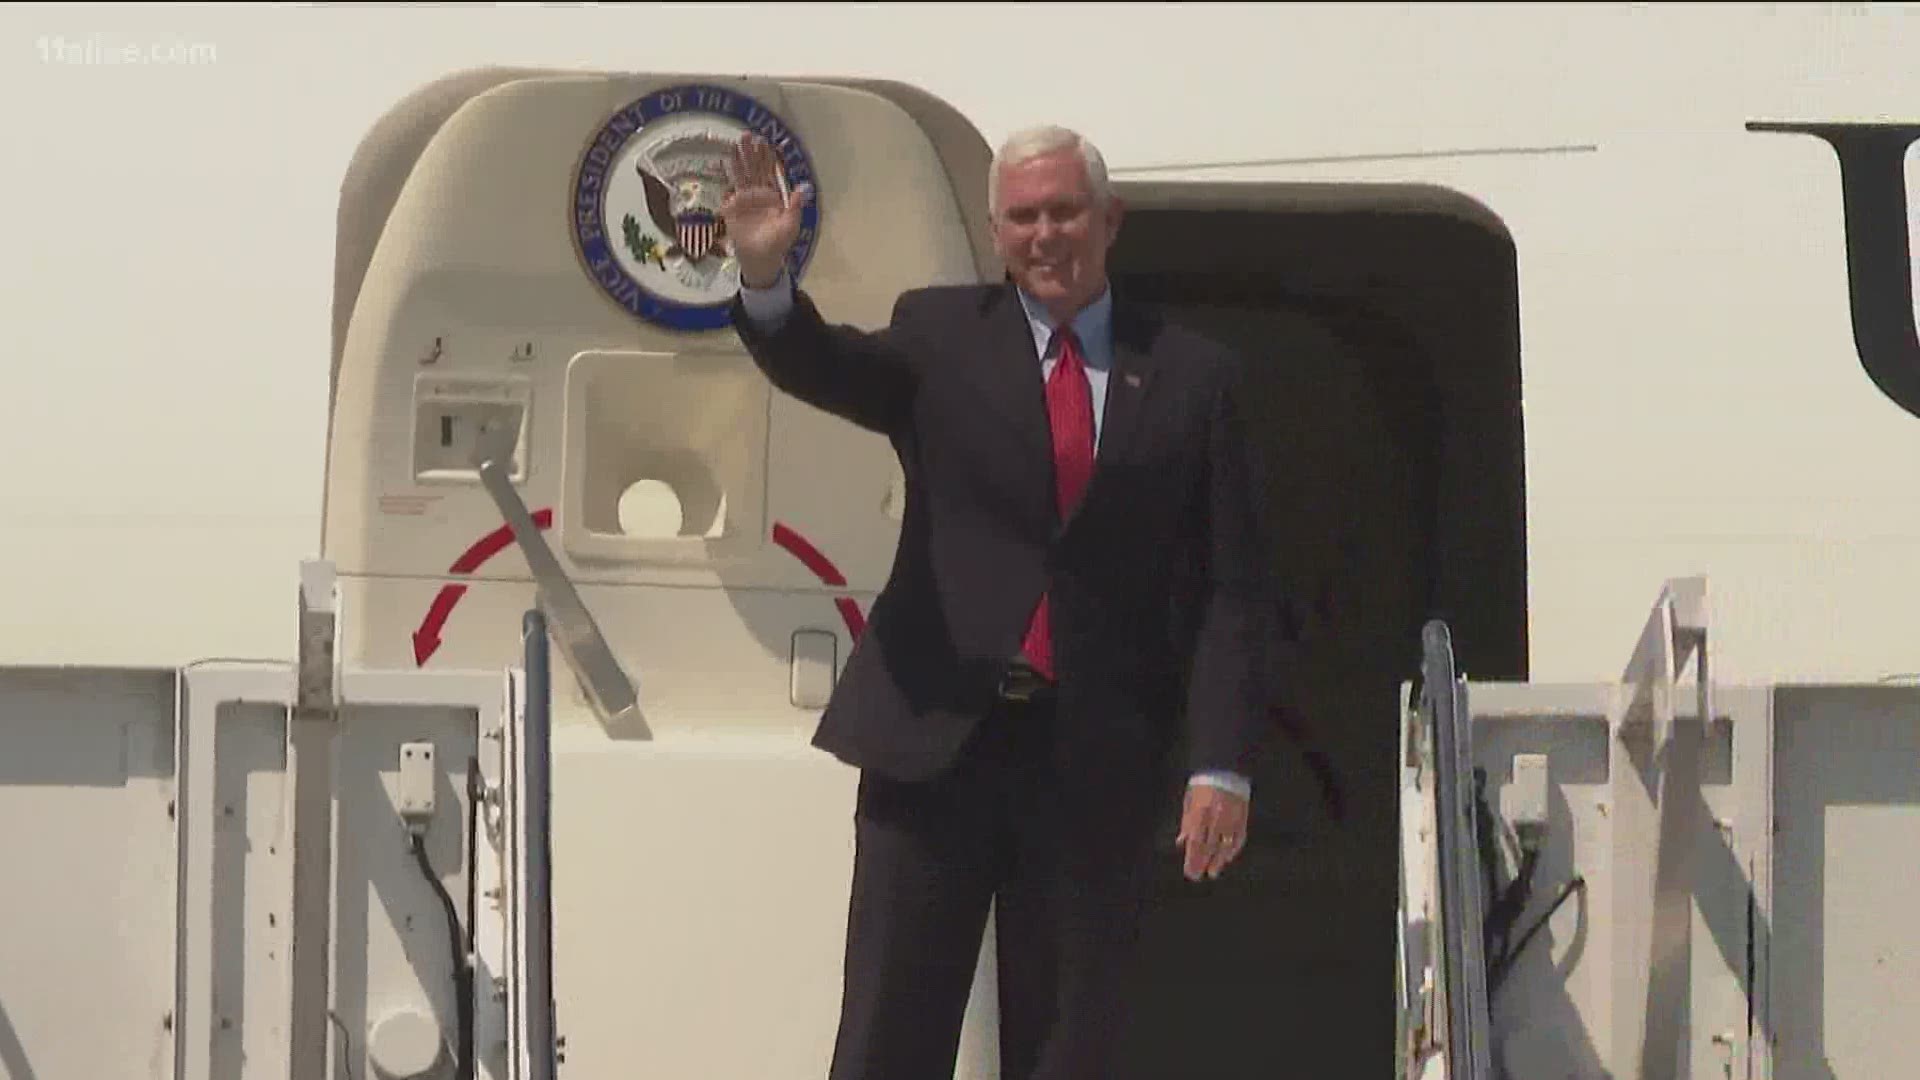 Afterward, Pence will lead a conversation with small business owners on reopening the economy and leave Georgia sometime tomorrow evening.